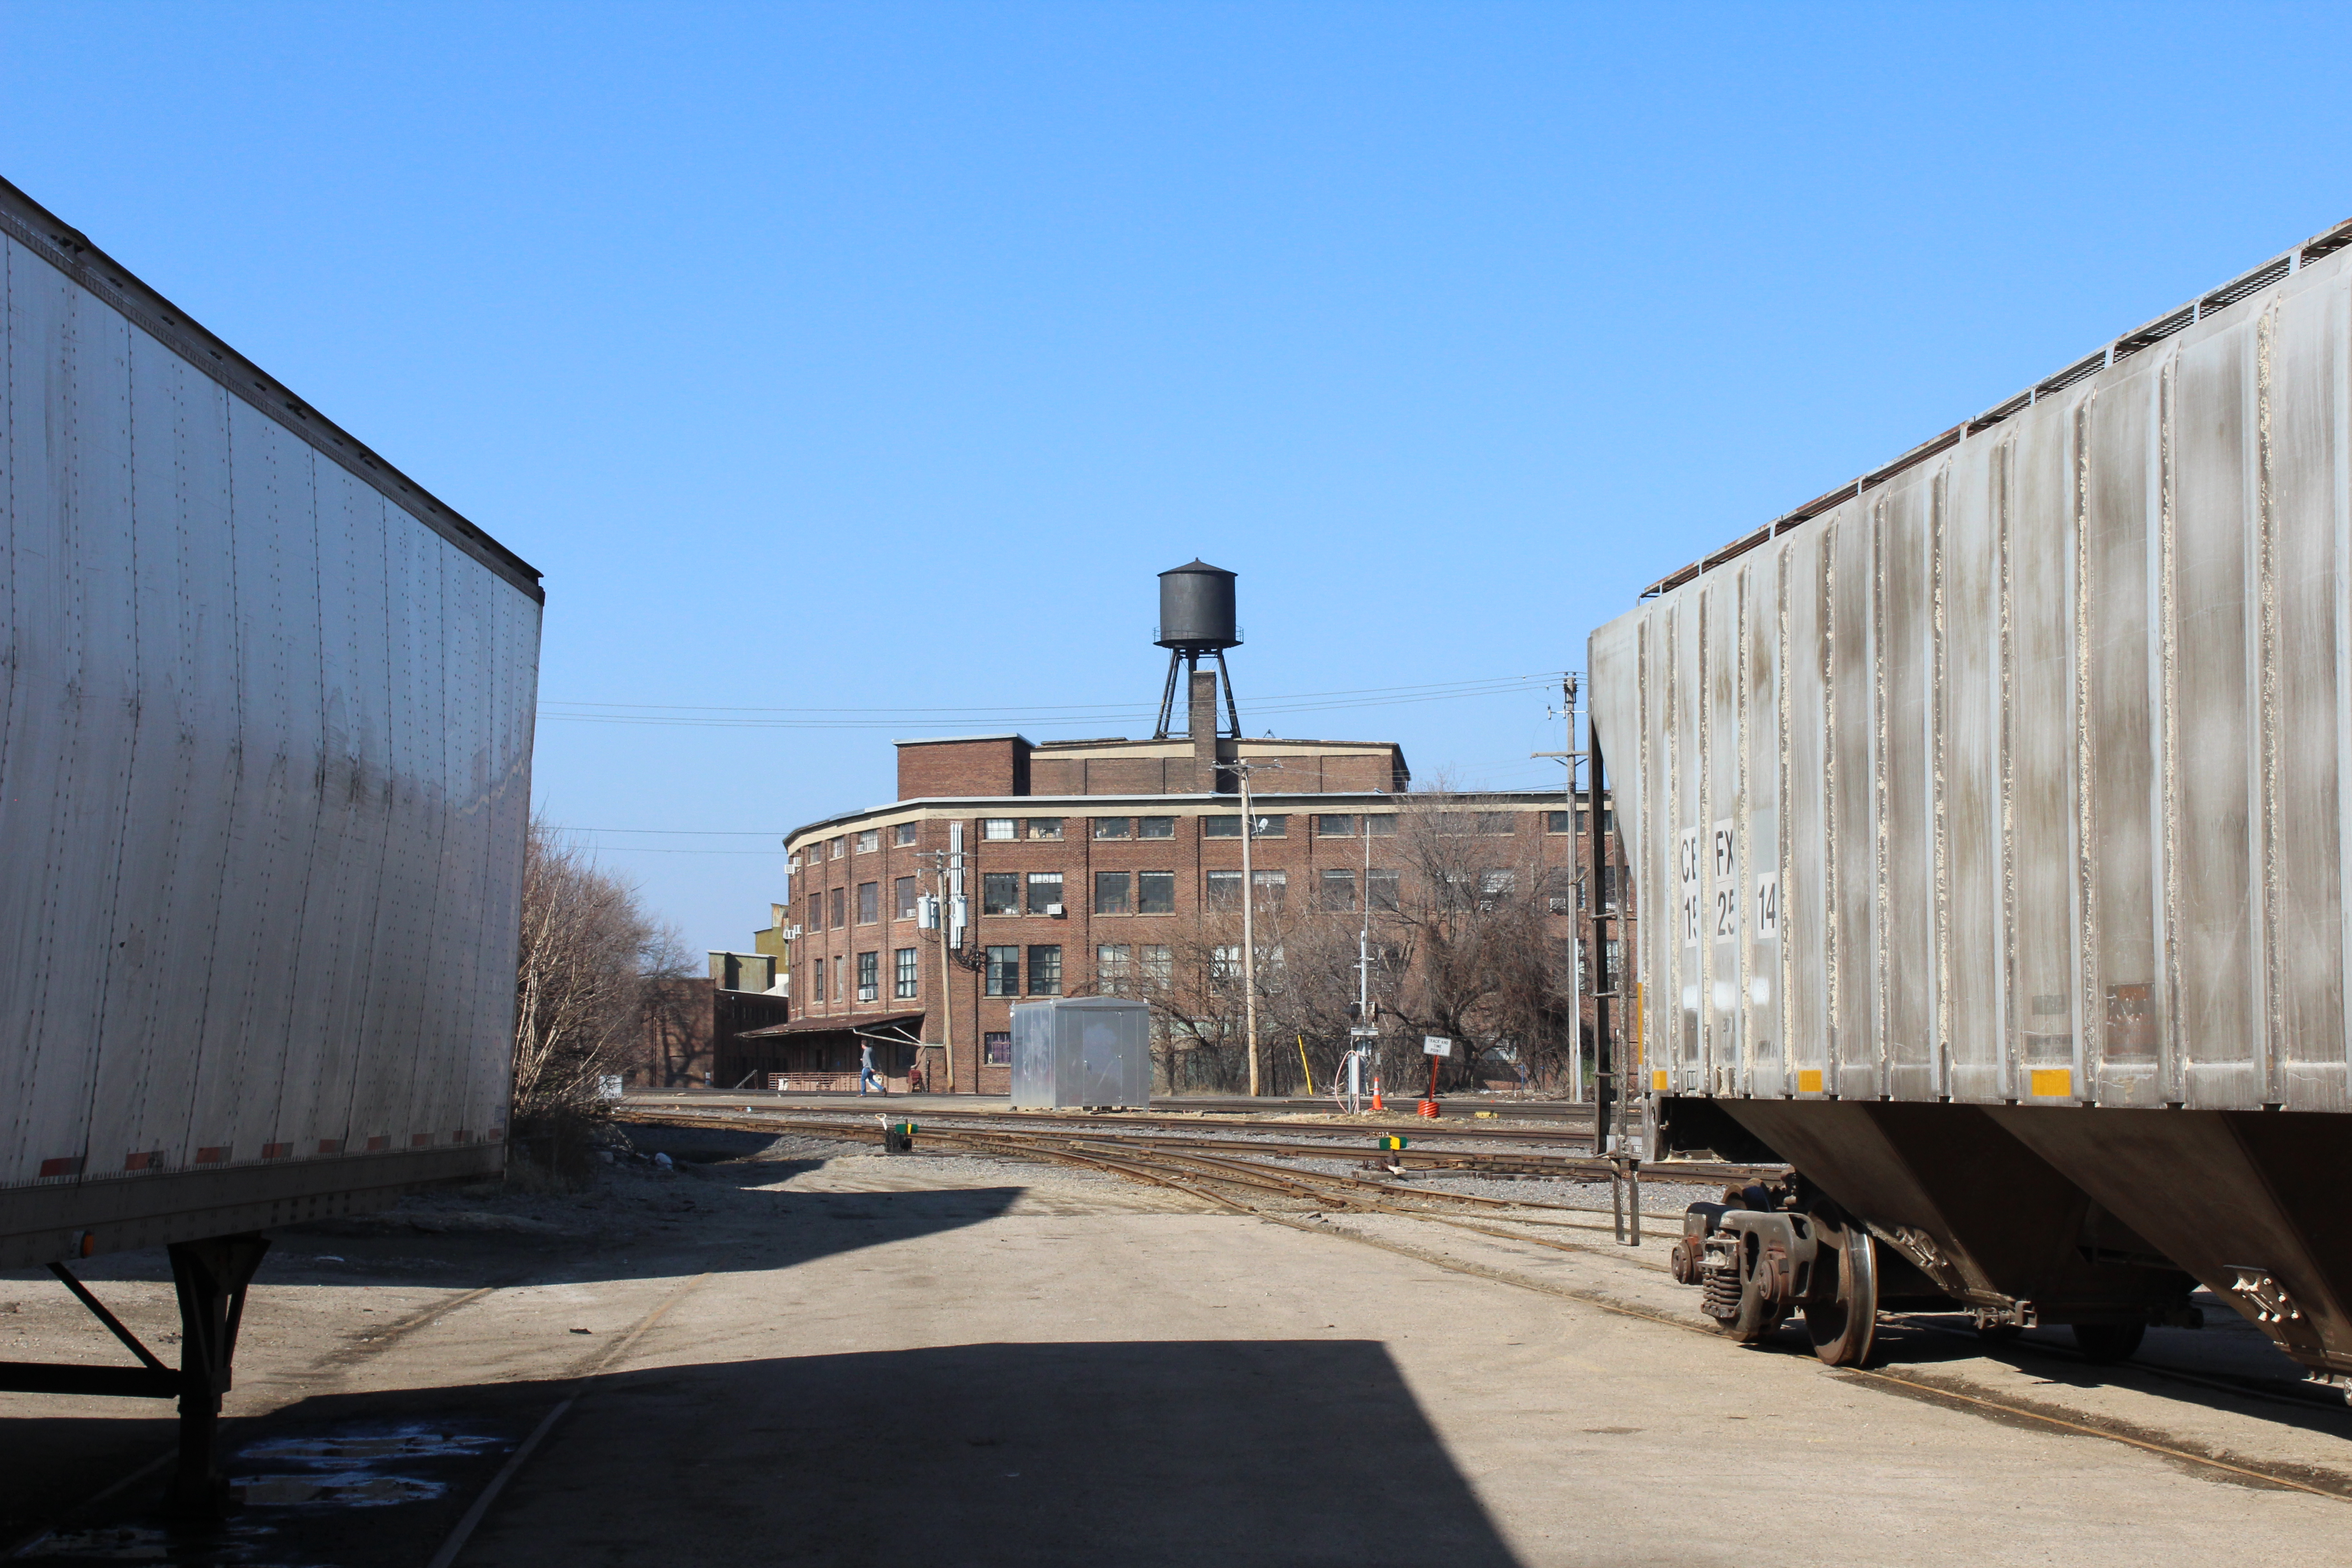 Freight trains in foreground and older brick building in background